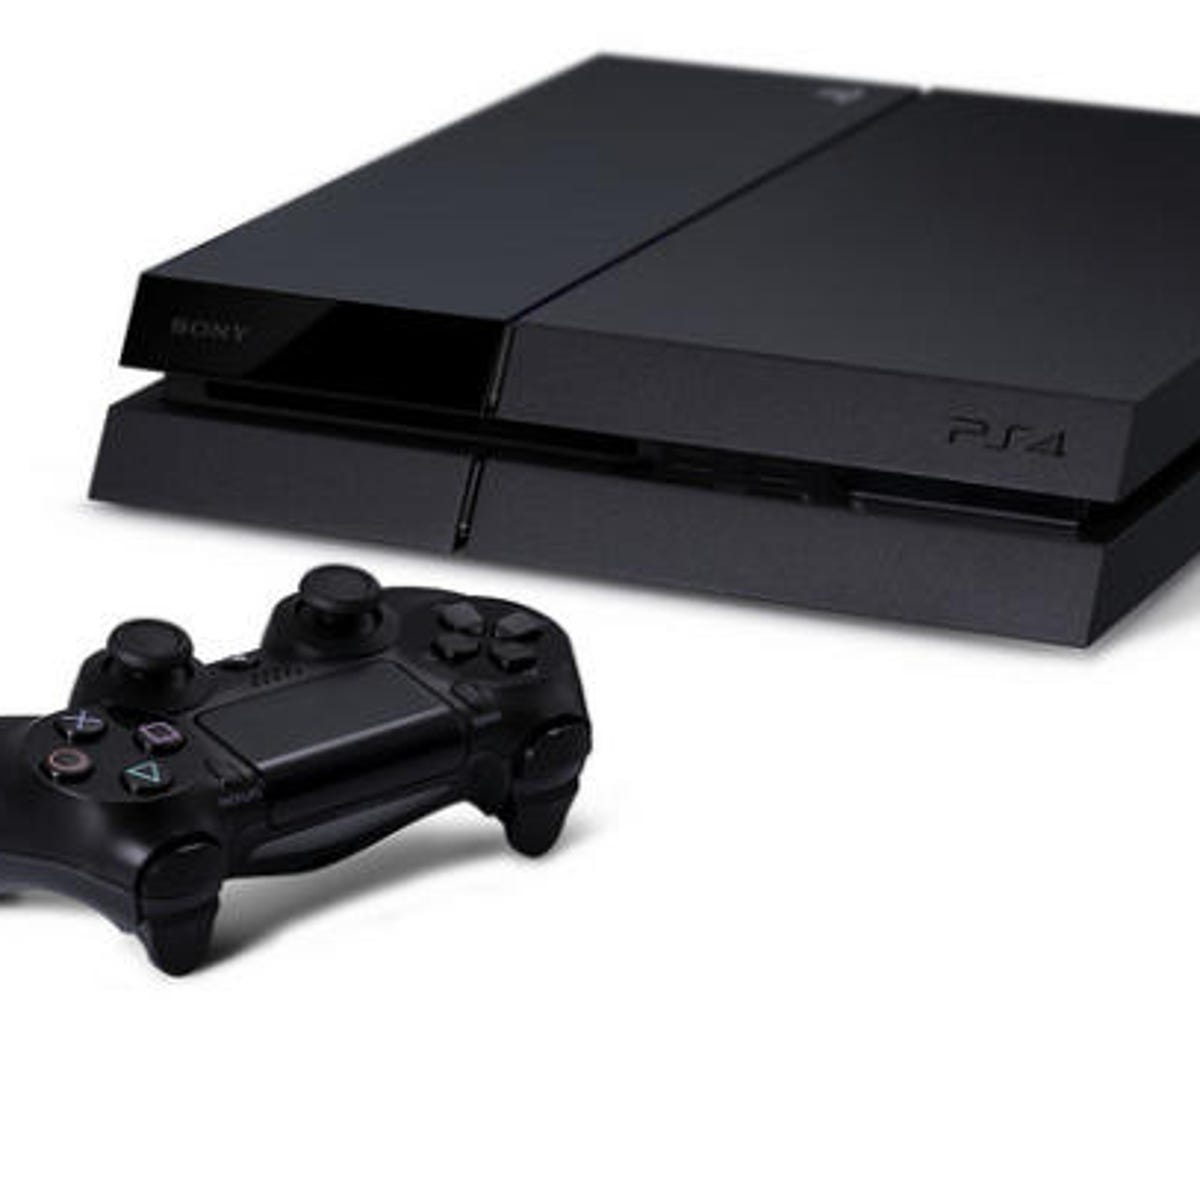 Ps4 500gb. Сони плейстейшен 4 фат. PLAYSTATION 4 fat. Sony PLAYSTATION 5. Тим ps4 fat.